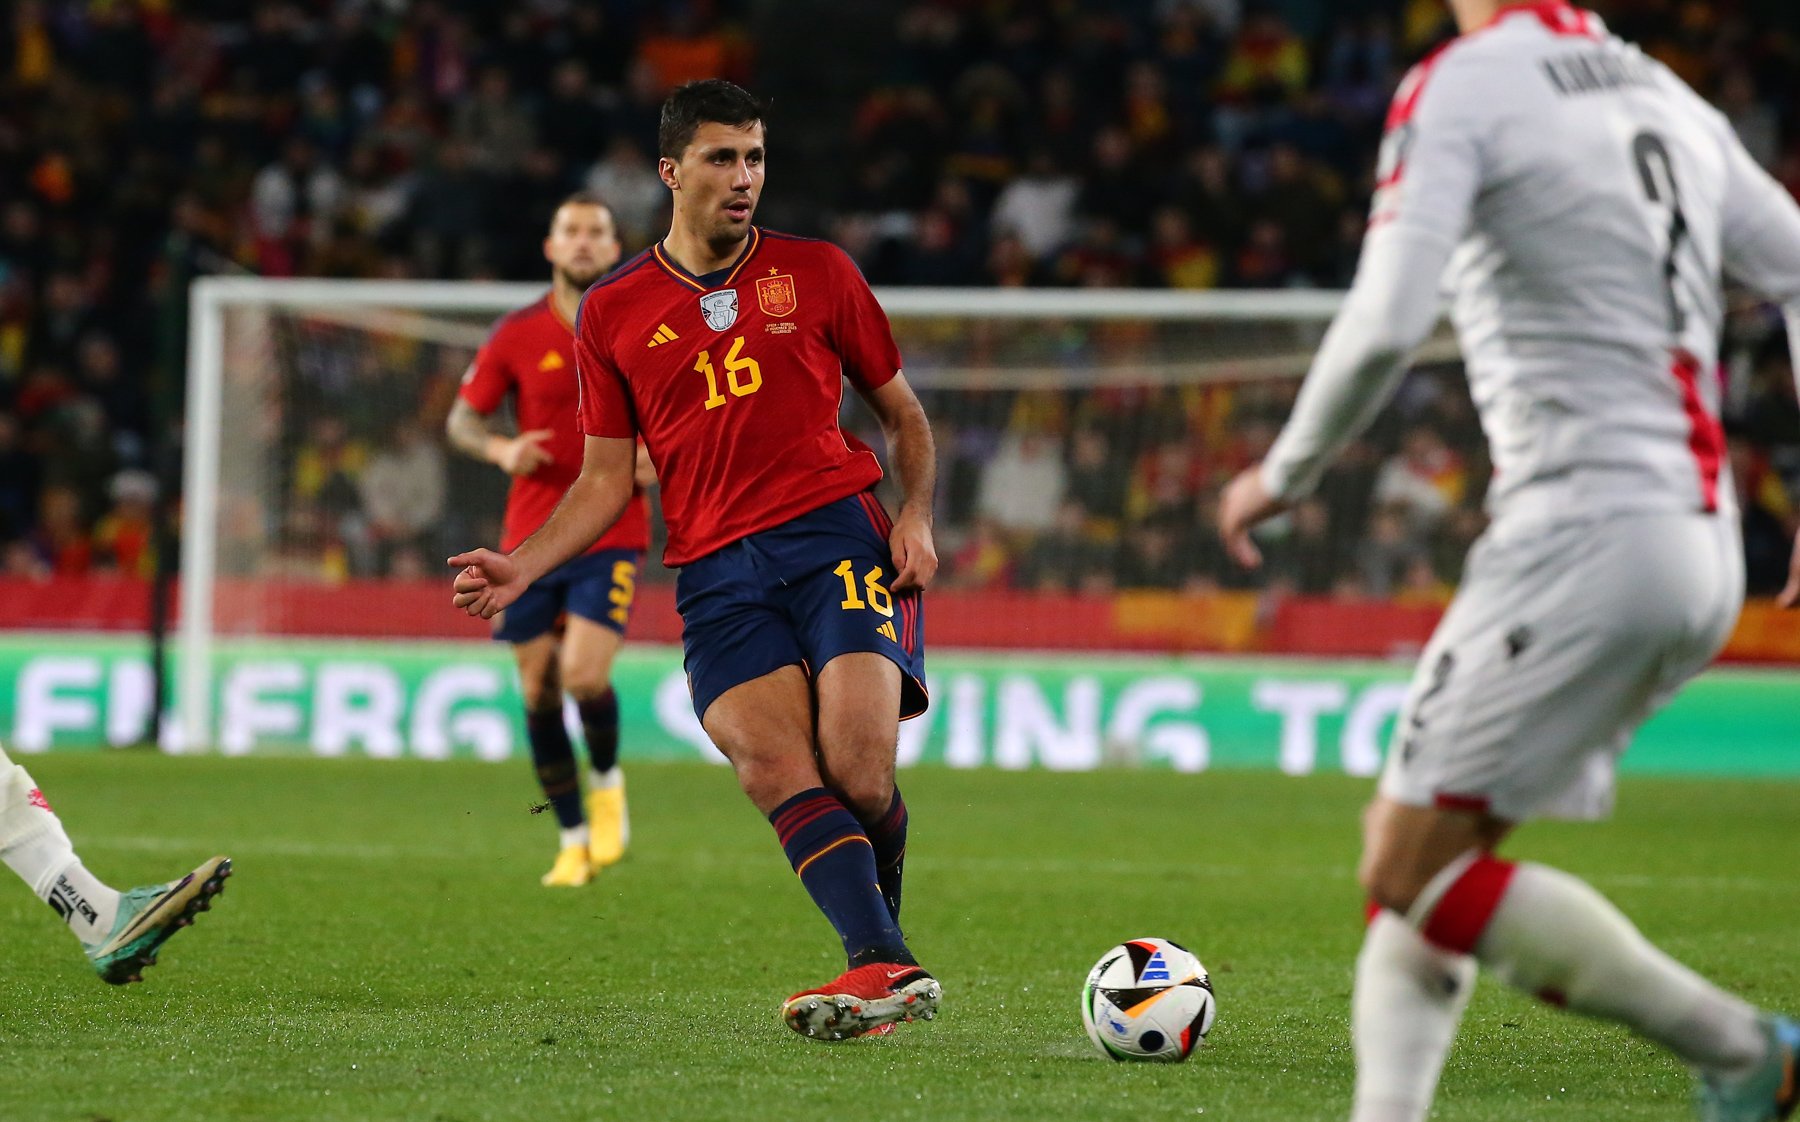 Spain-Colombia: streaming, TV channel and compositions